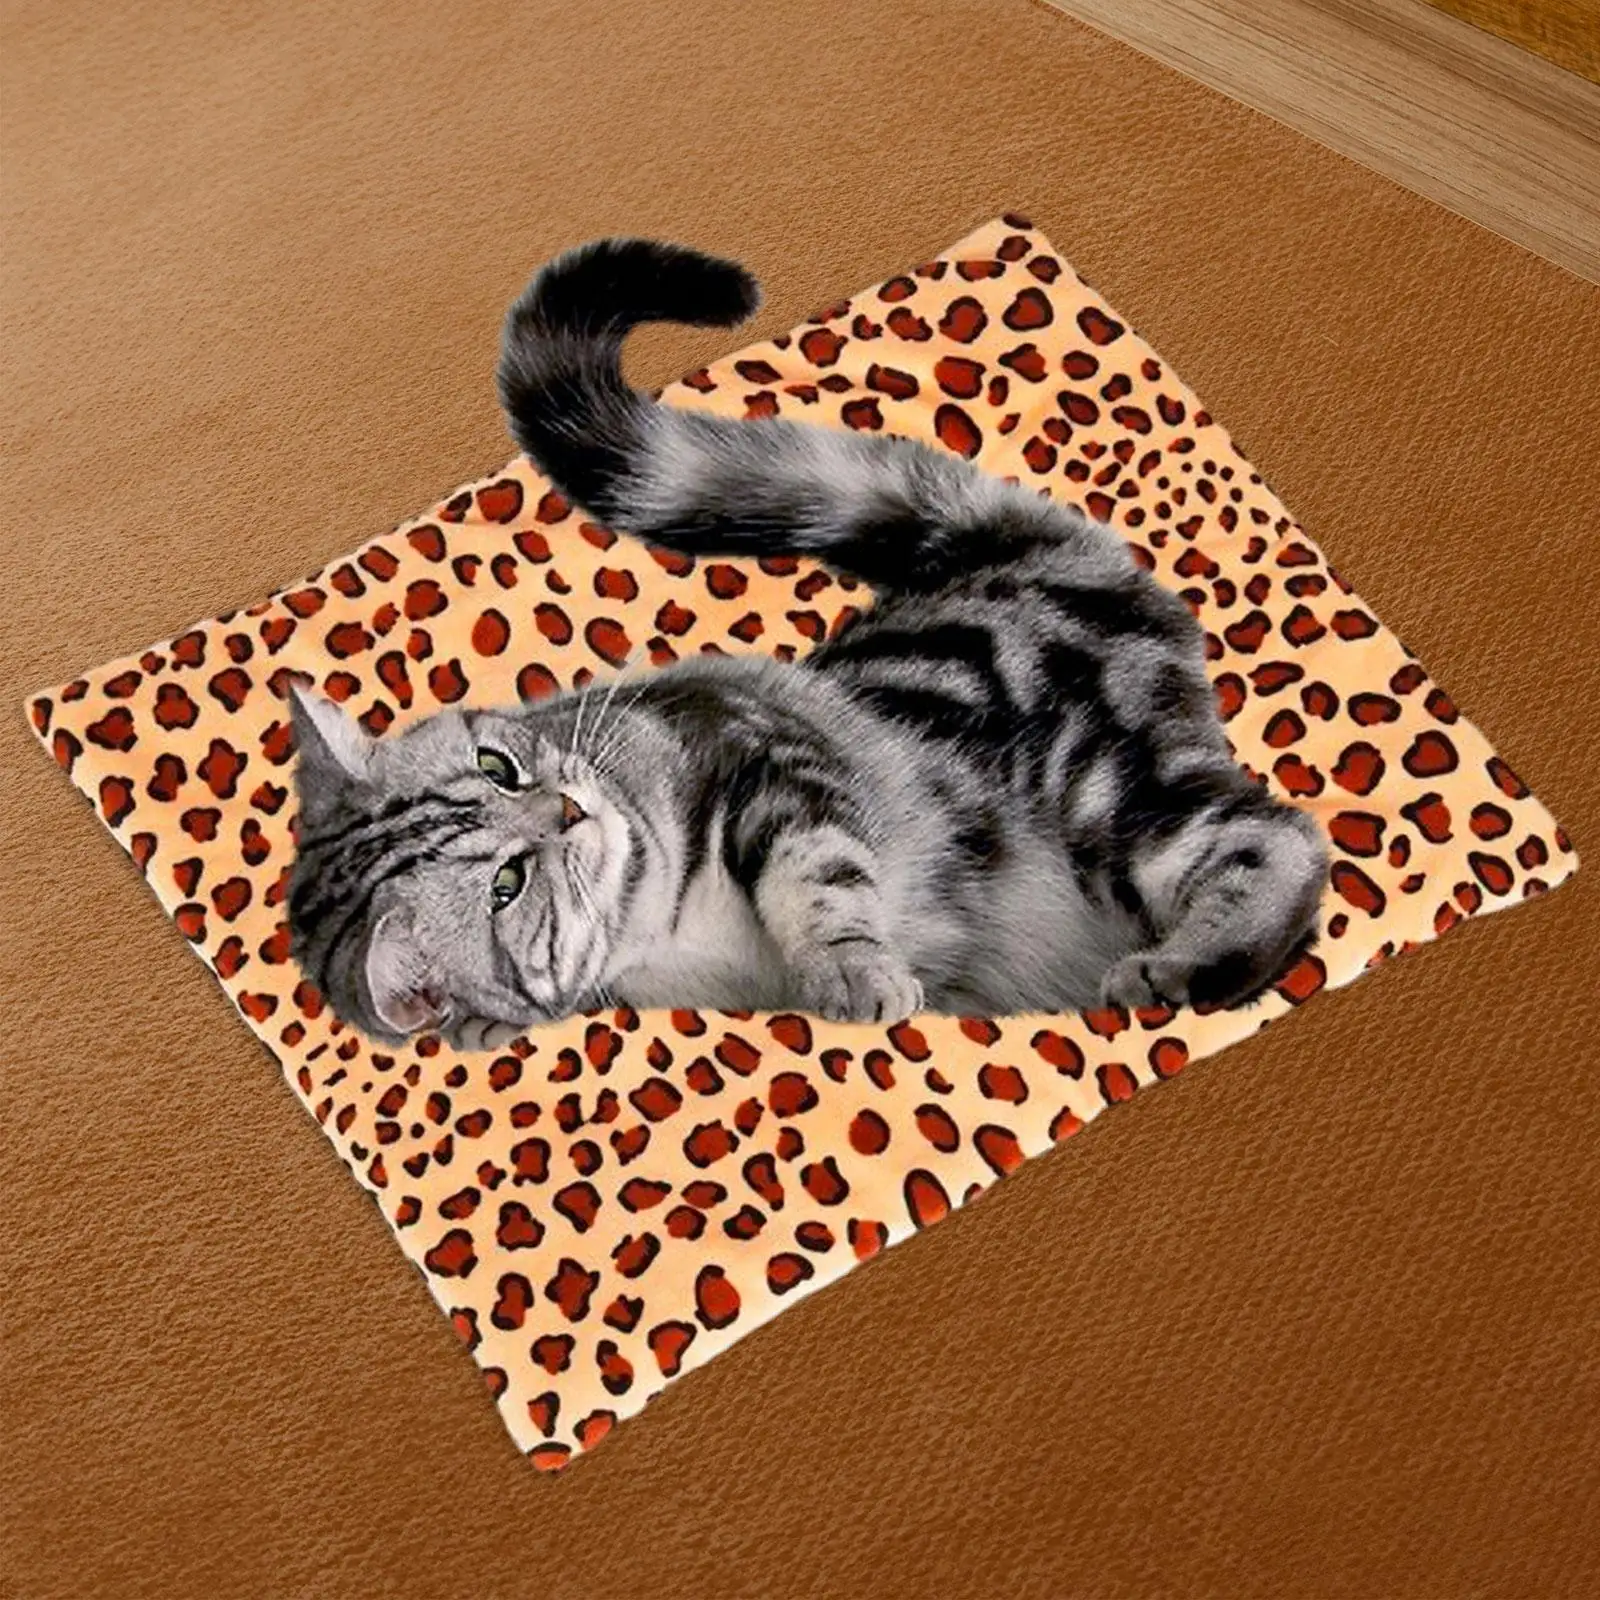 Pet Heating Pads Adjustable Temperature Crate Mat Winter Warm Cats Dogs Warmer Bed for Sleeping Kitty Other Animals Outside